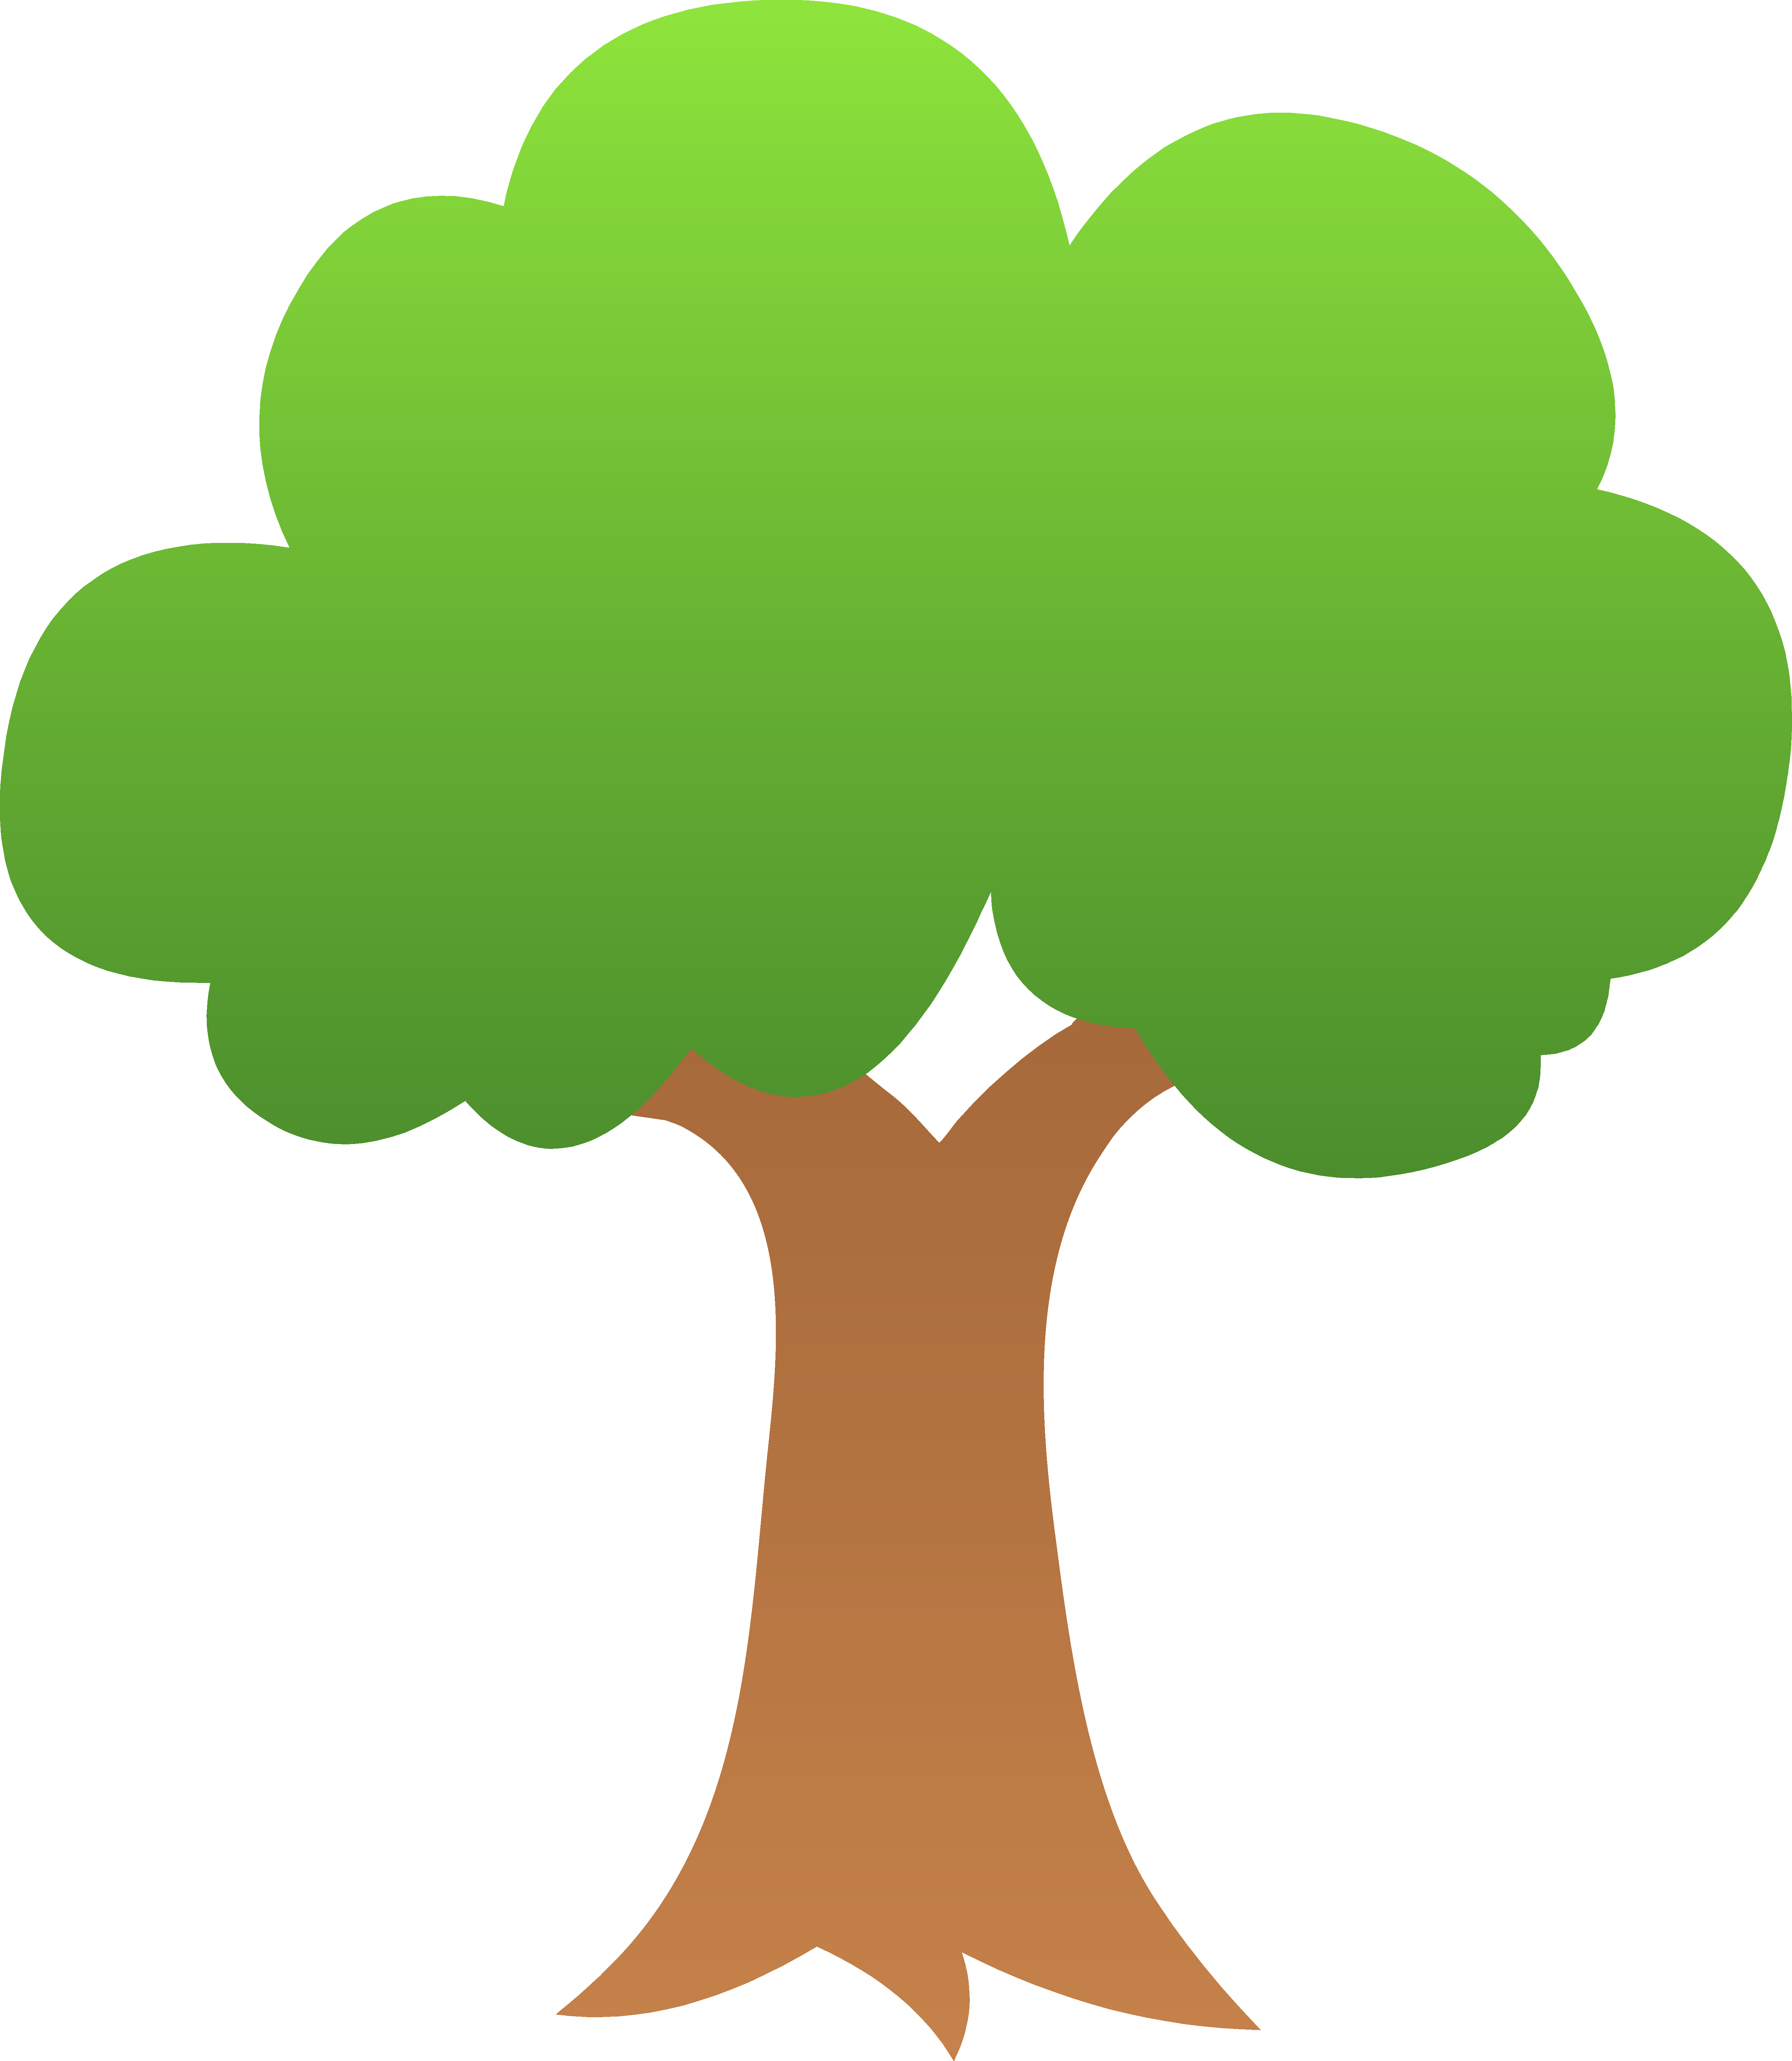 Tree Clipart & Tree Clip Art Images.